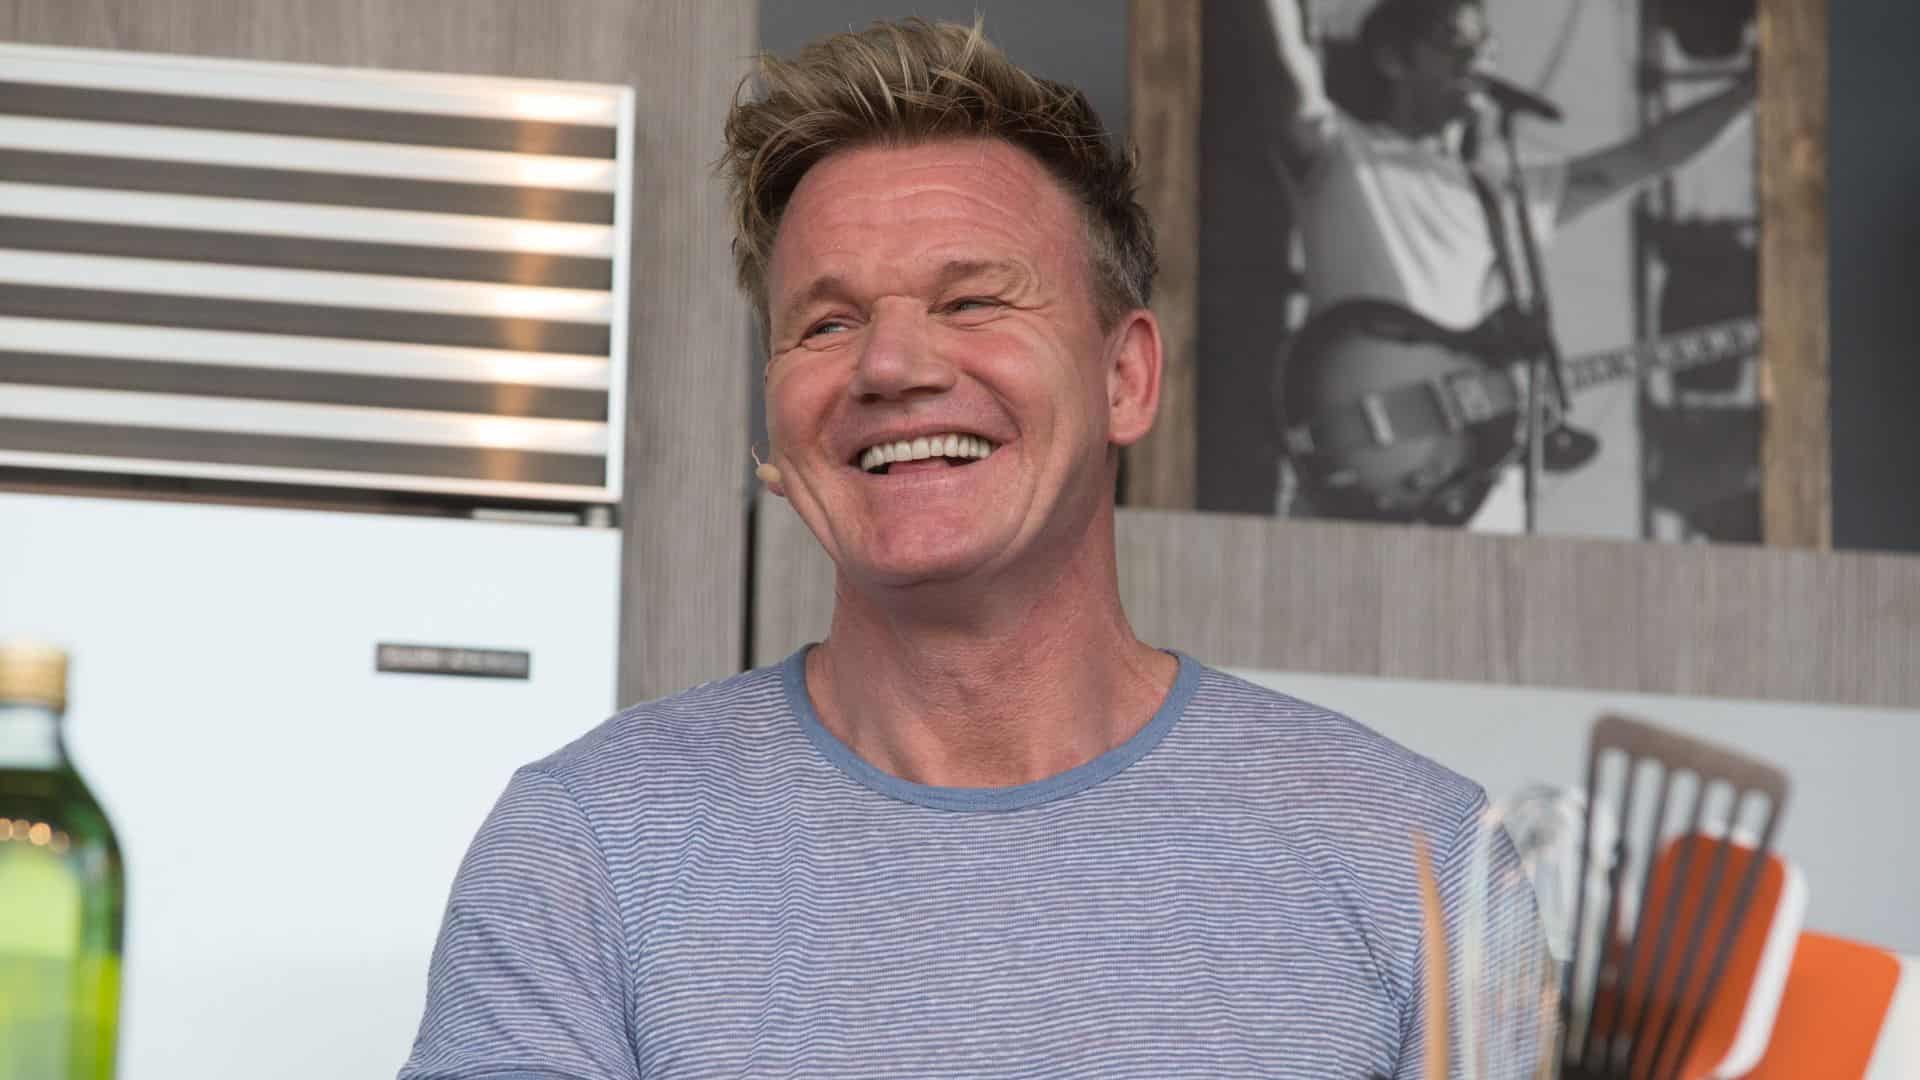 <p>Gordon Ramsay may be one of the most iconic chefs in the whole world. If you have a question about food, he is the person to ask! That is why his favorite fast-food restaurant and tips for eating on the go must be correct. So which fast food restaurant, exactly, does Gordon Ramsay love? And how does he find good food while traveling around the world? Keep reading to find out! </p>